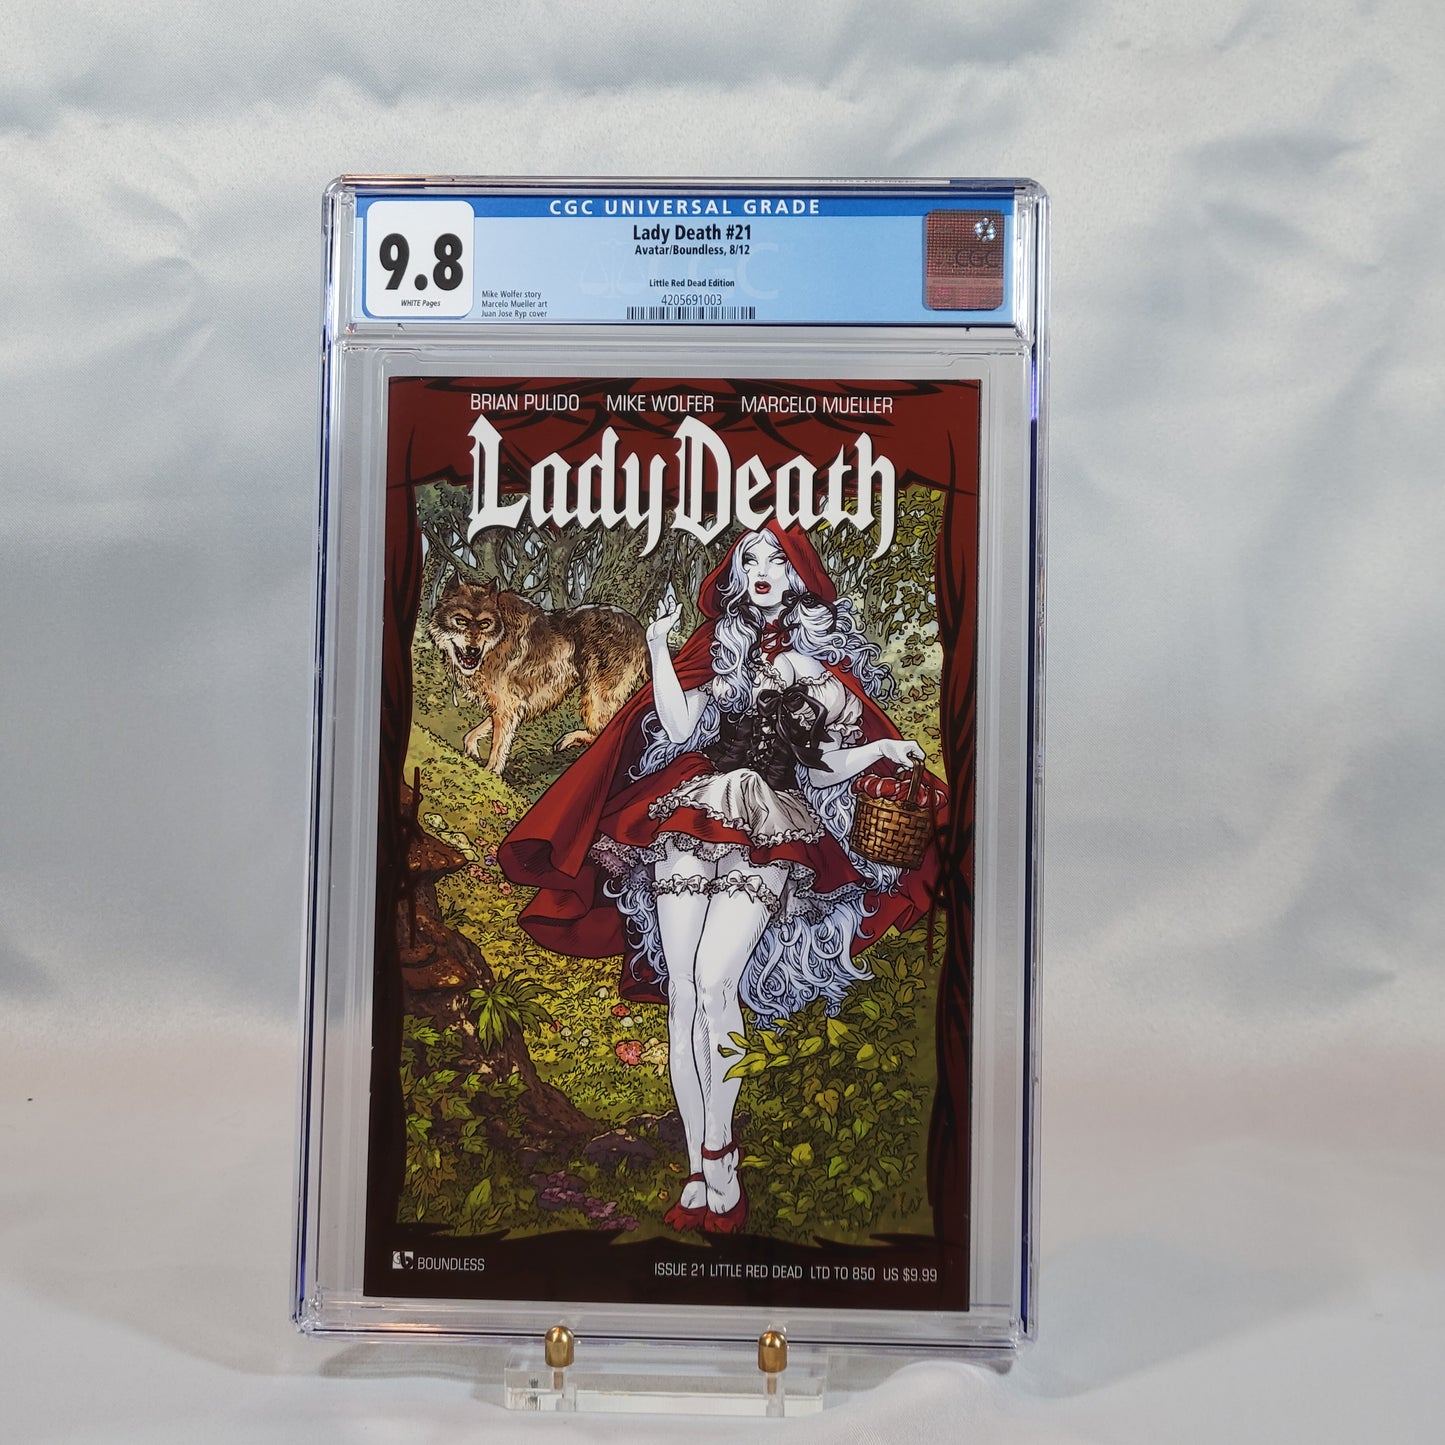 Lady Death #21 "Little Red Dead" Edition